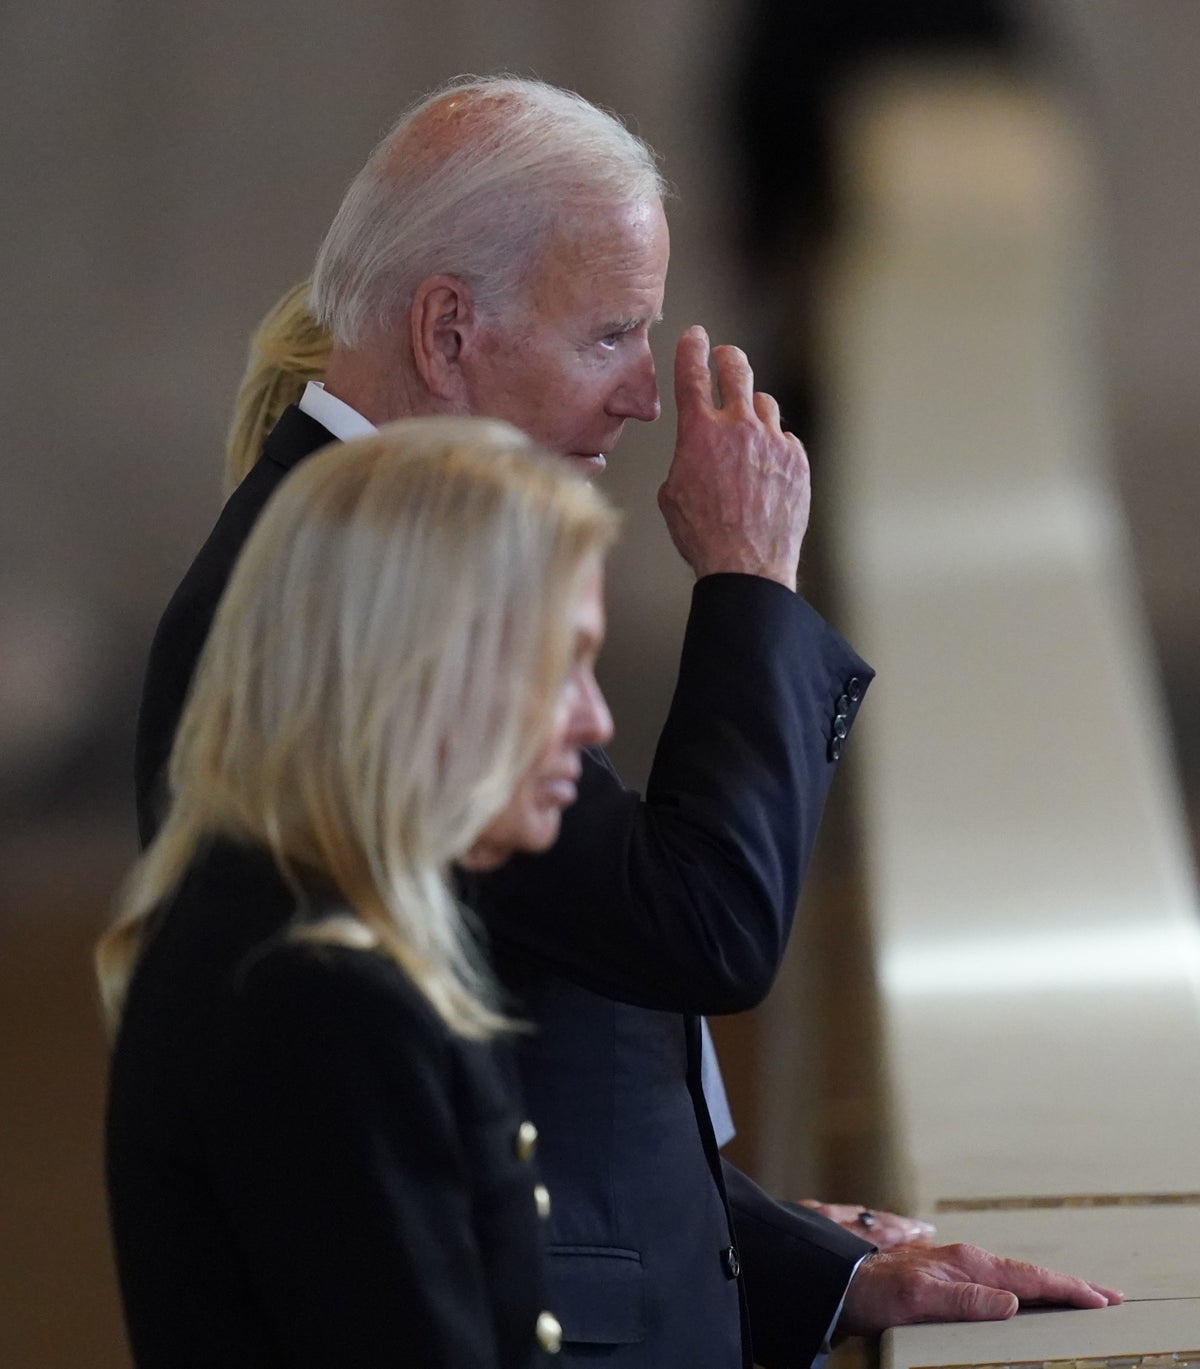 Biden and first lady pay respects to Queen Elizabeth II at Westminster Hall